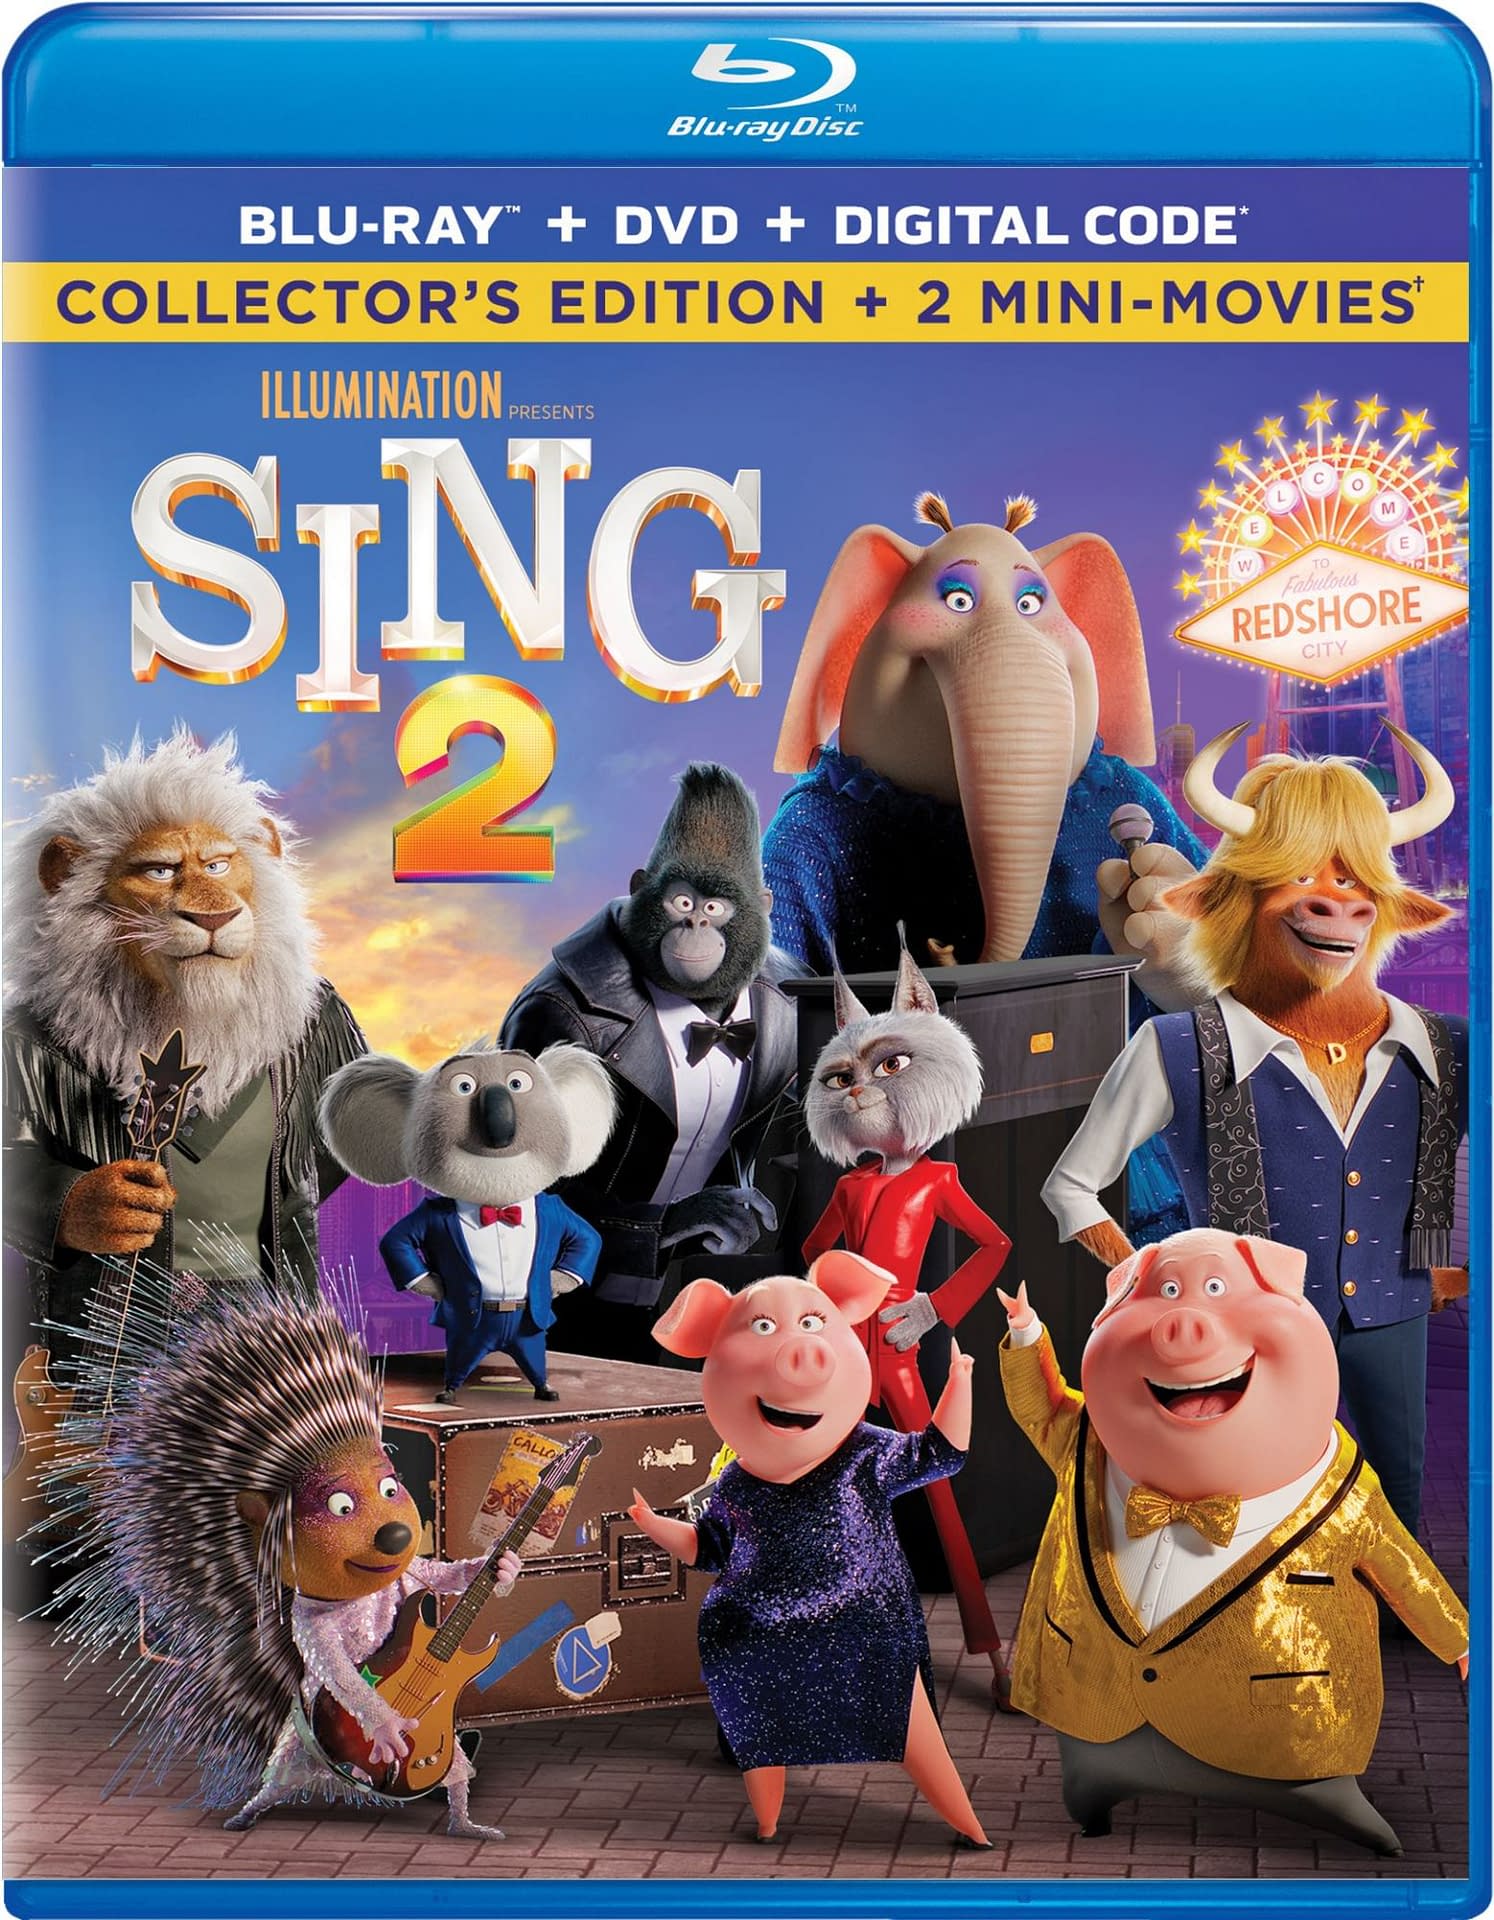 Sing 2 Hits Blu-ray On March 29th, On Digital Today